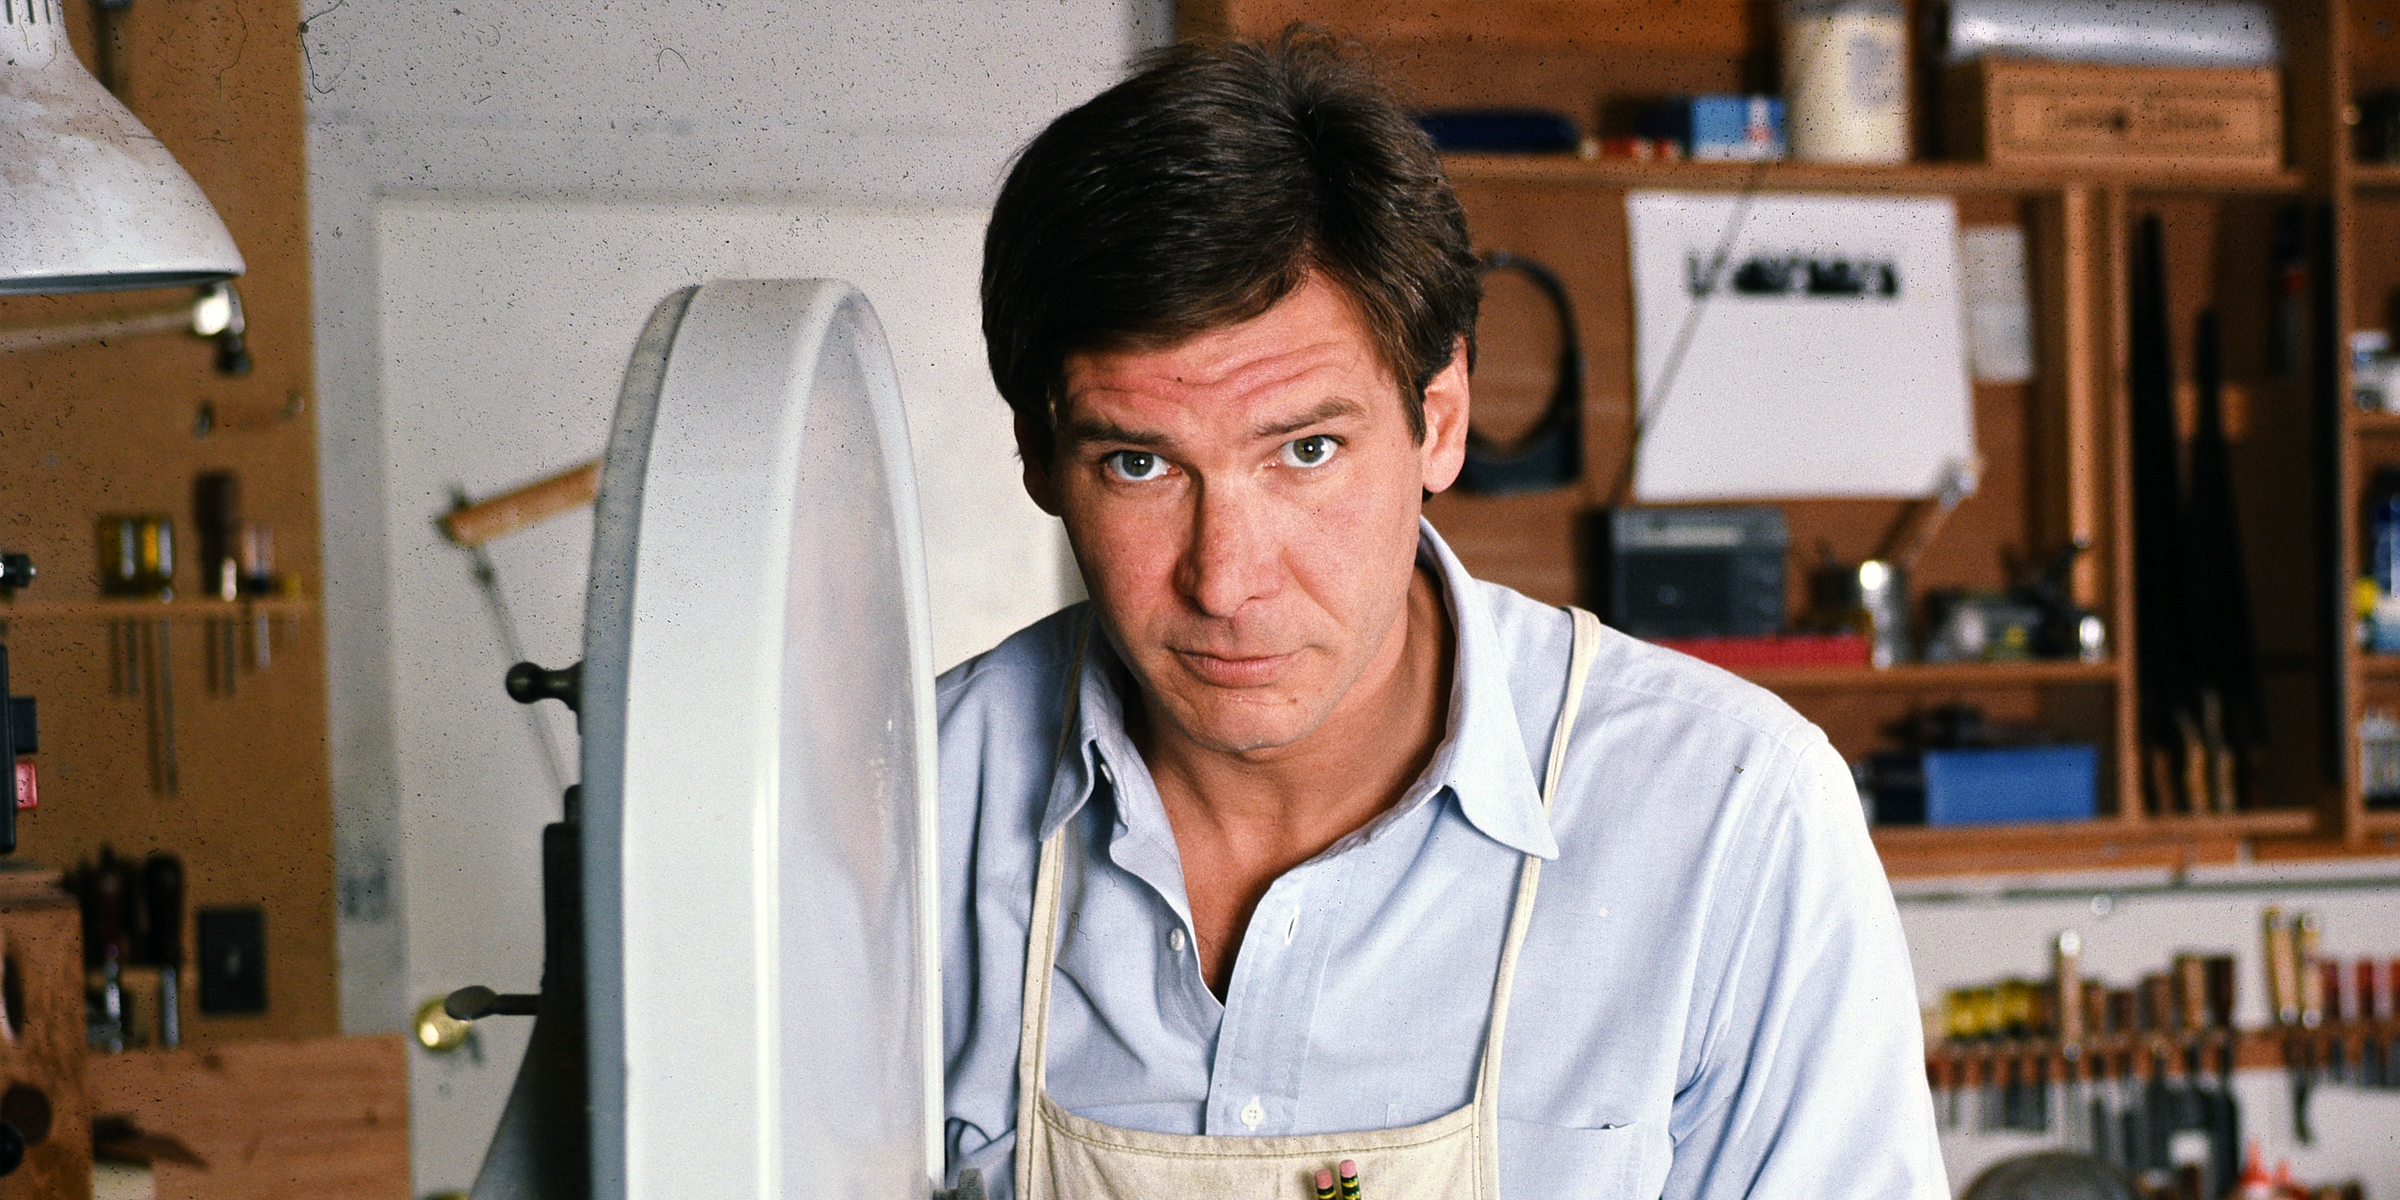 Harrison Ford | Source : Getty Images